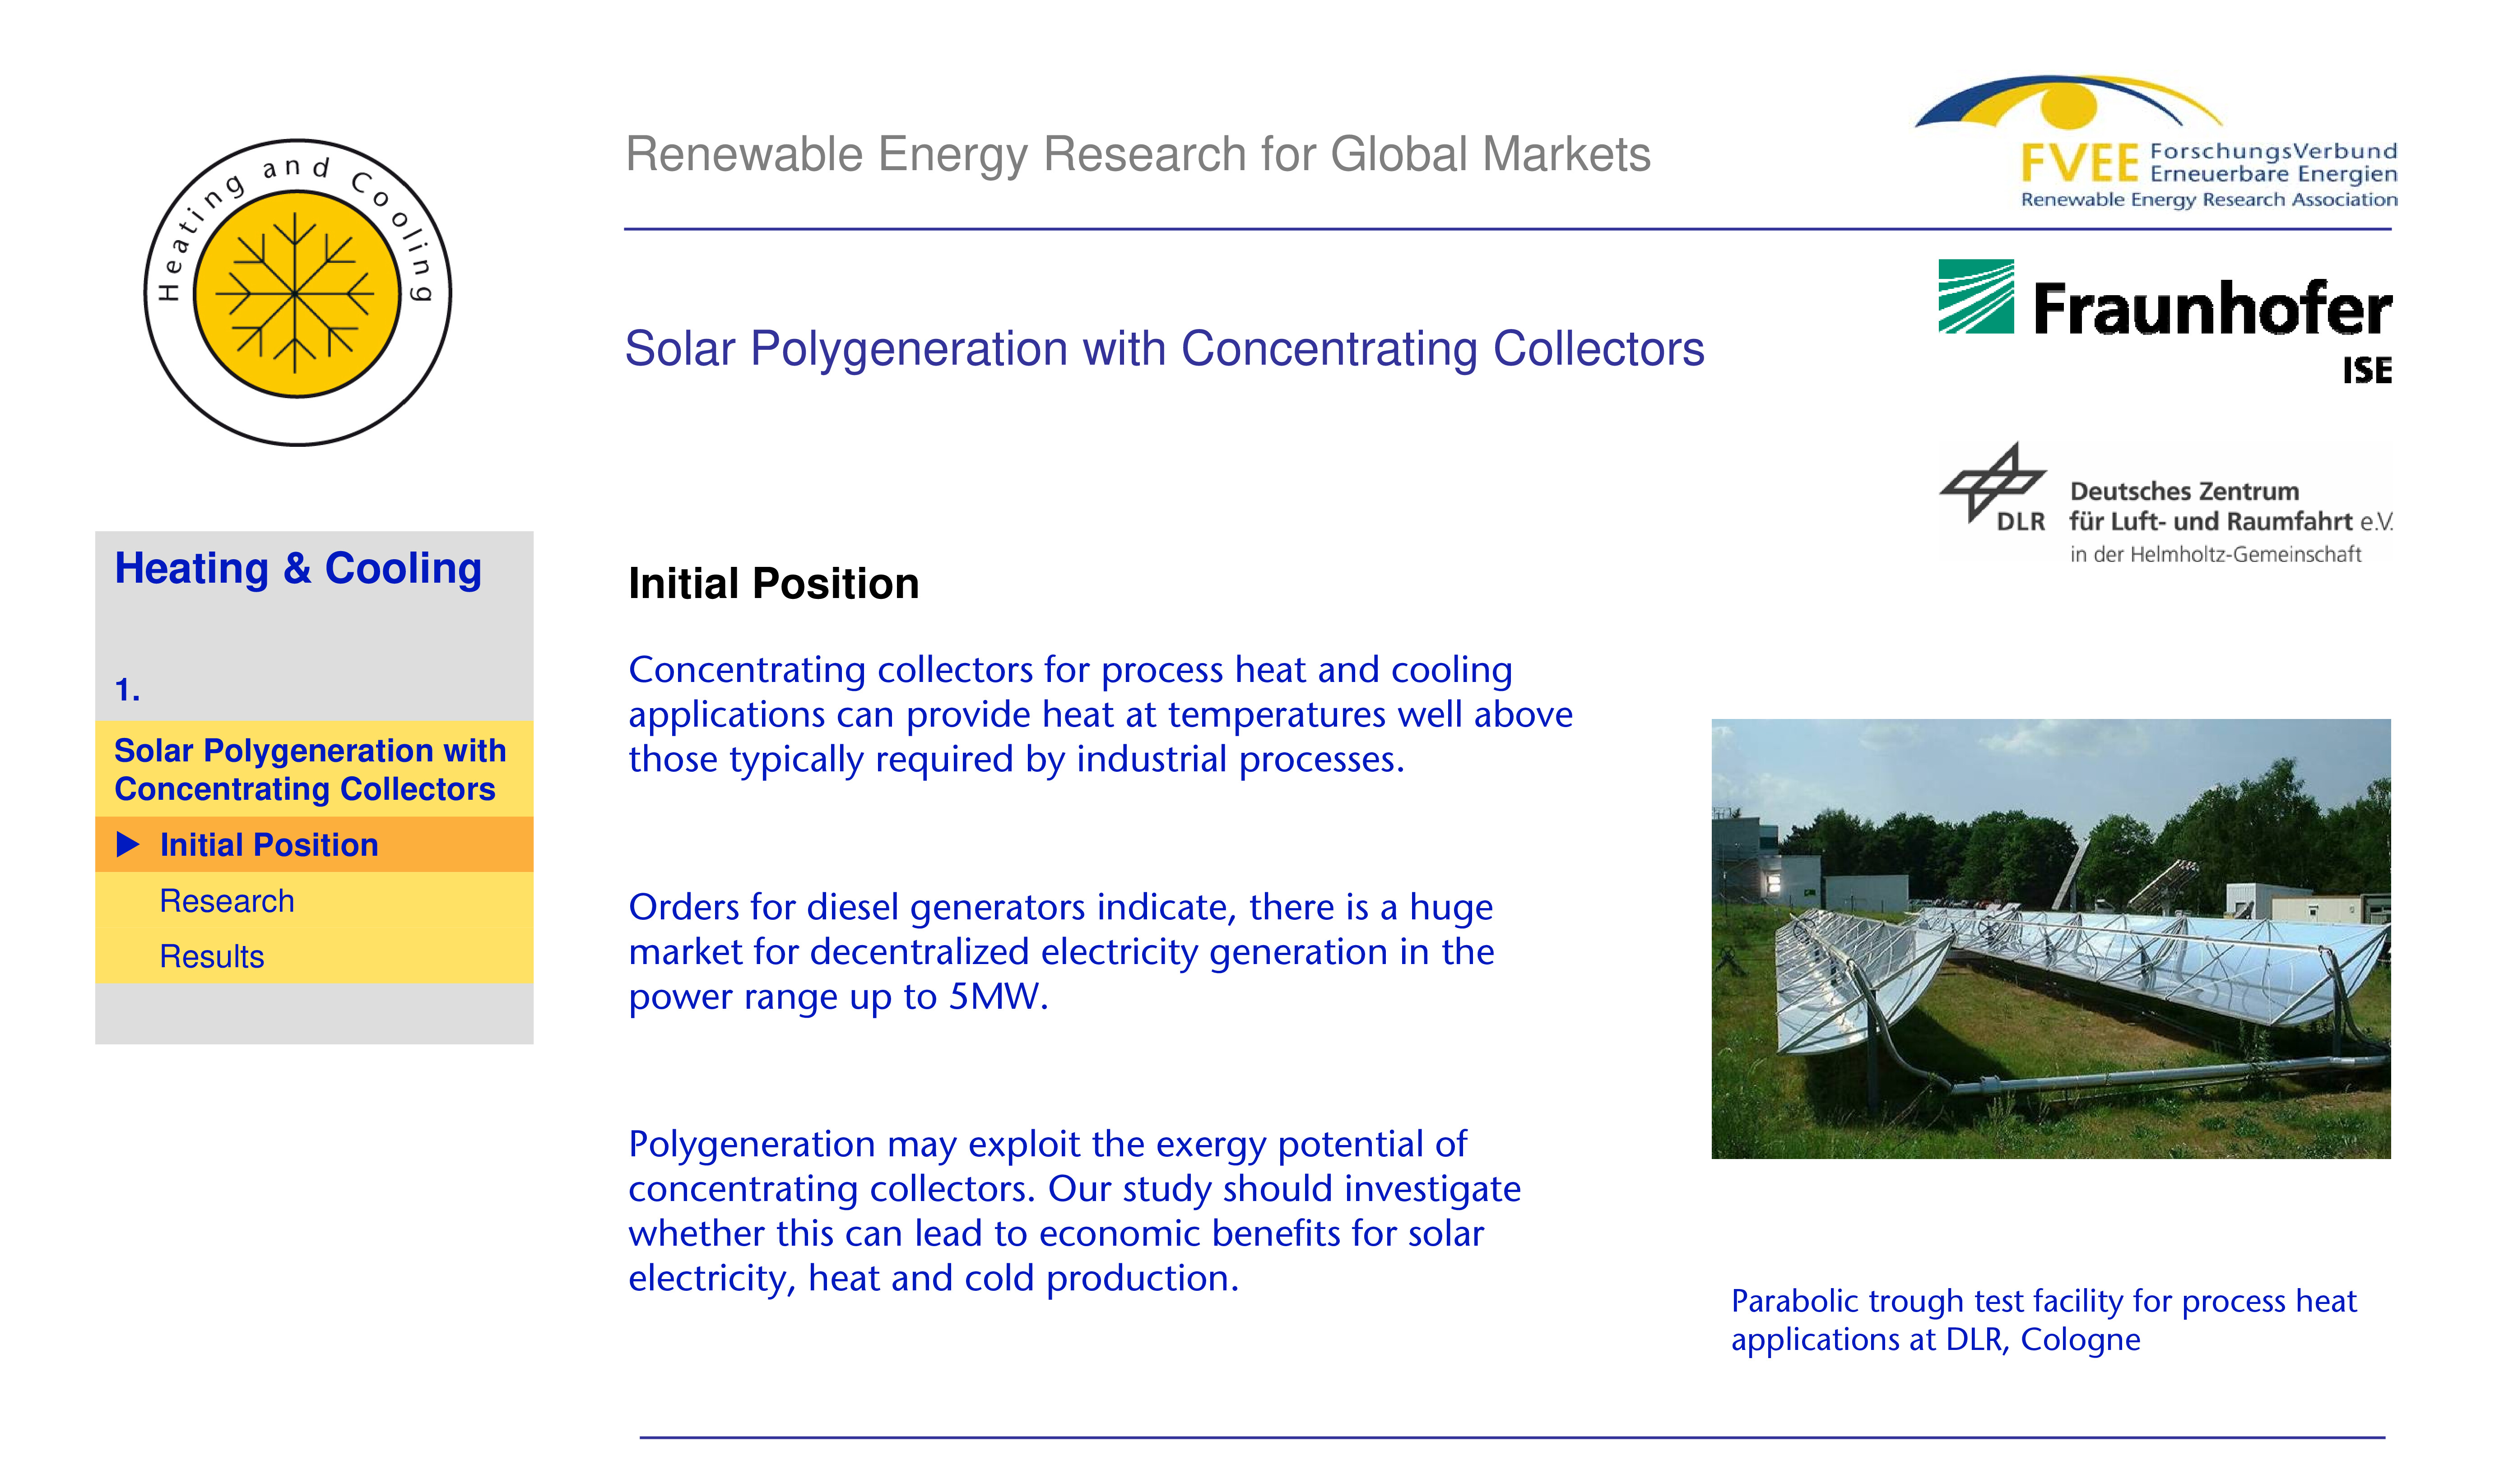 POSTER SESSION "Renewable Energy Research for Global Markets"